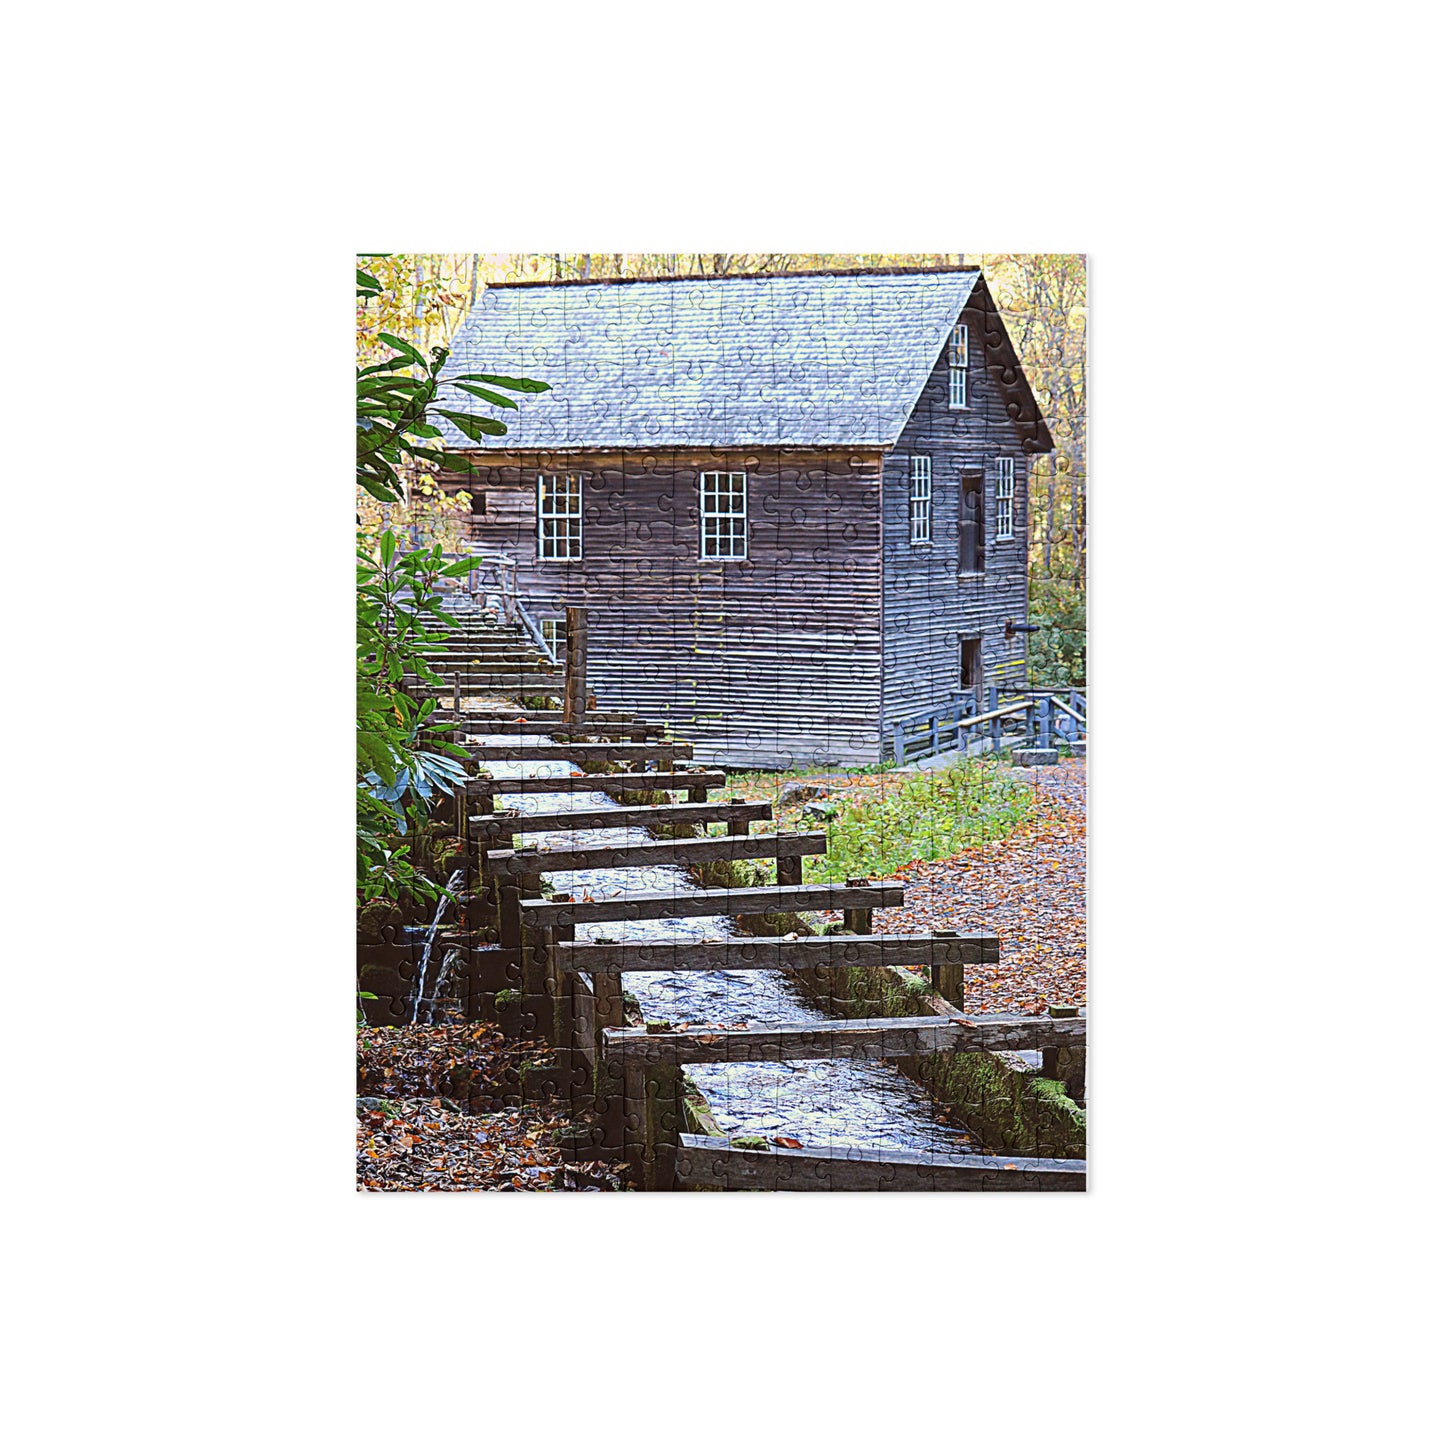 Grist Mill Jigsaw Puzzle